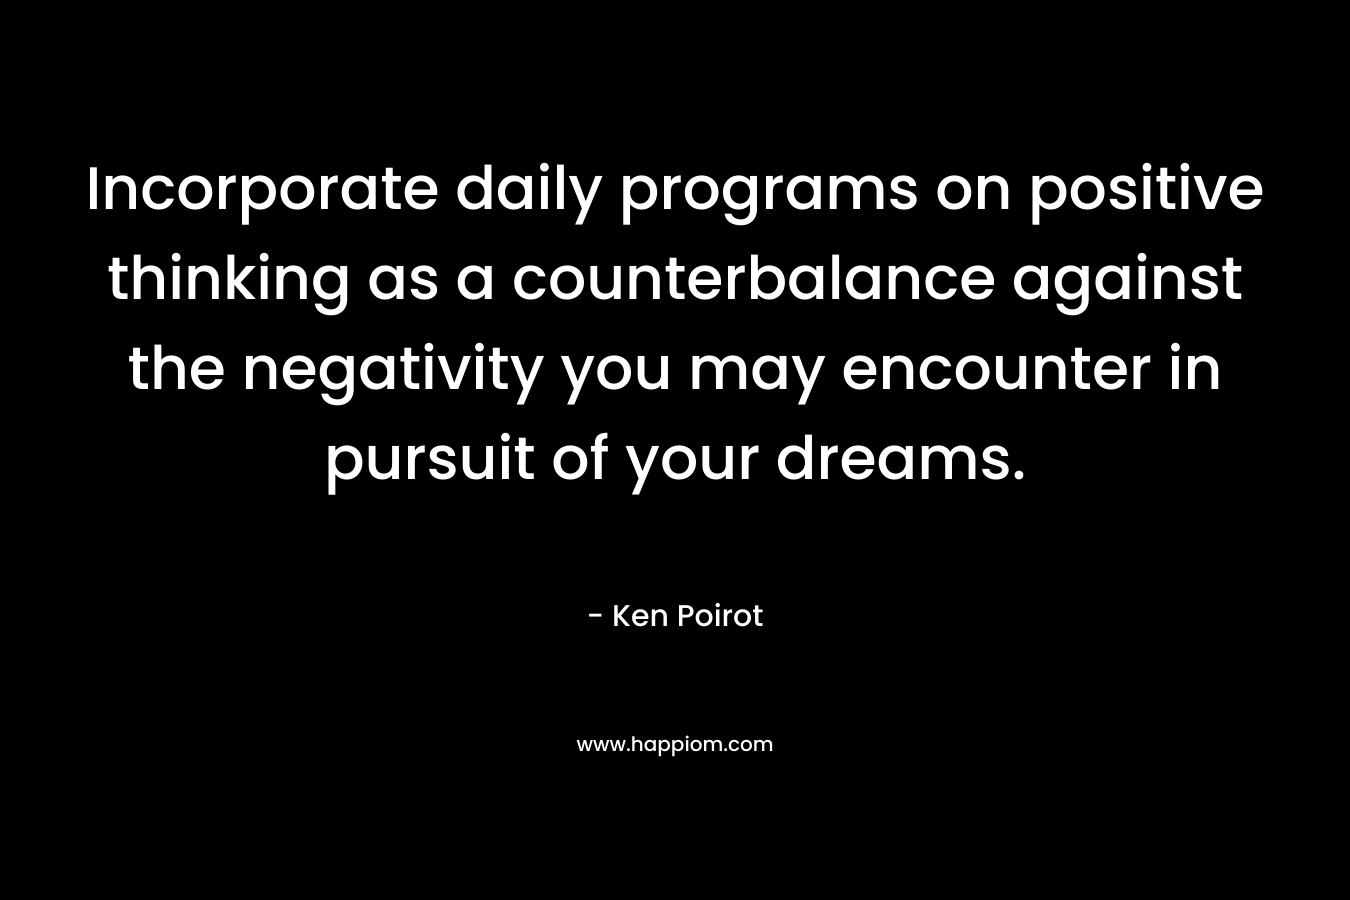 Incorporate daily programs on positive thinking as a counterbalance against the negativity you may encounter in pursuit of your dreams.